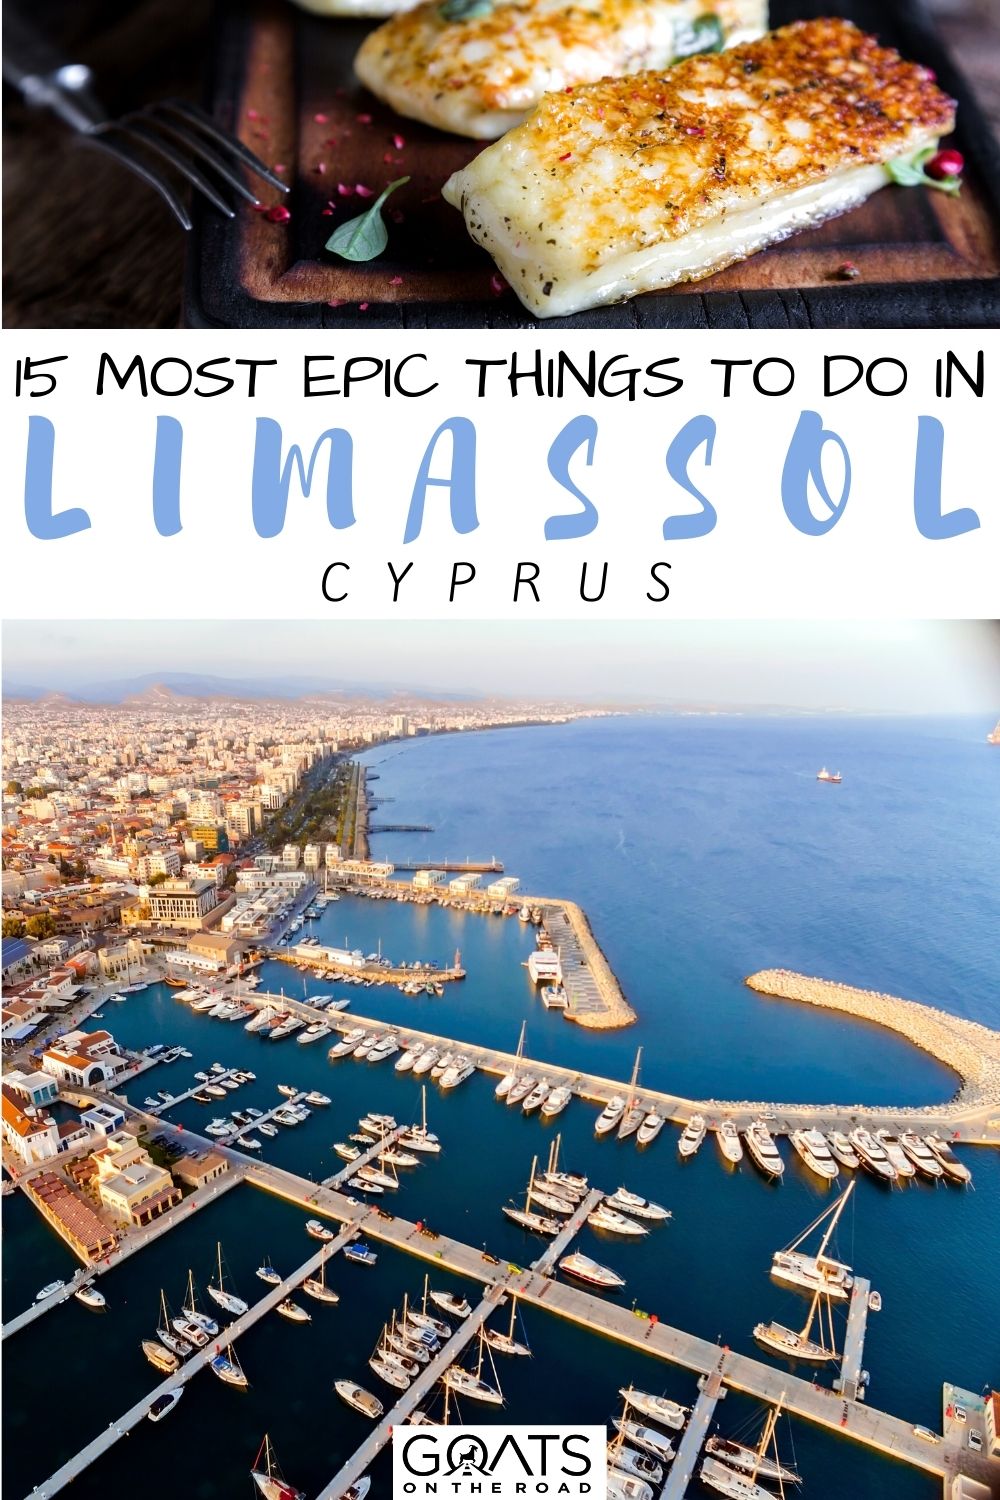 “15 Most Epic Things To Do in Limassol, Cyprus